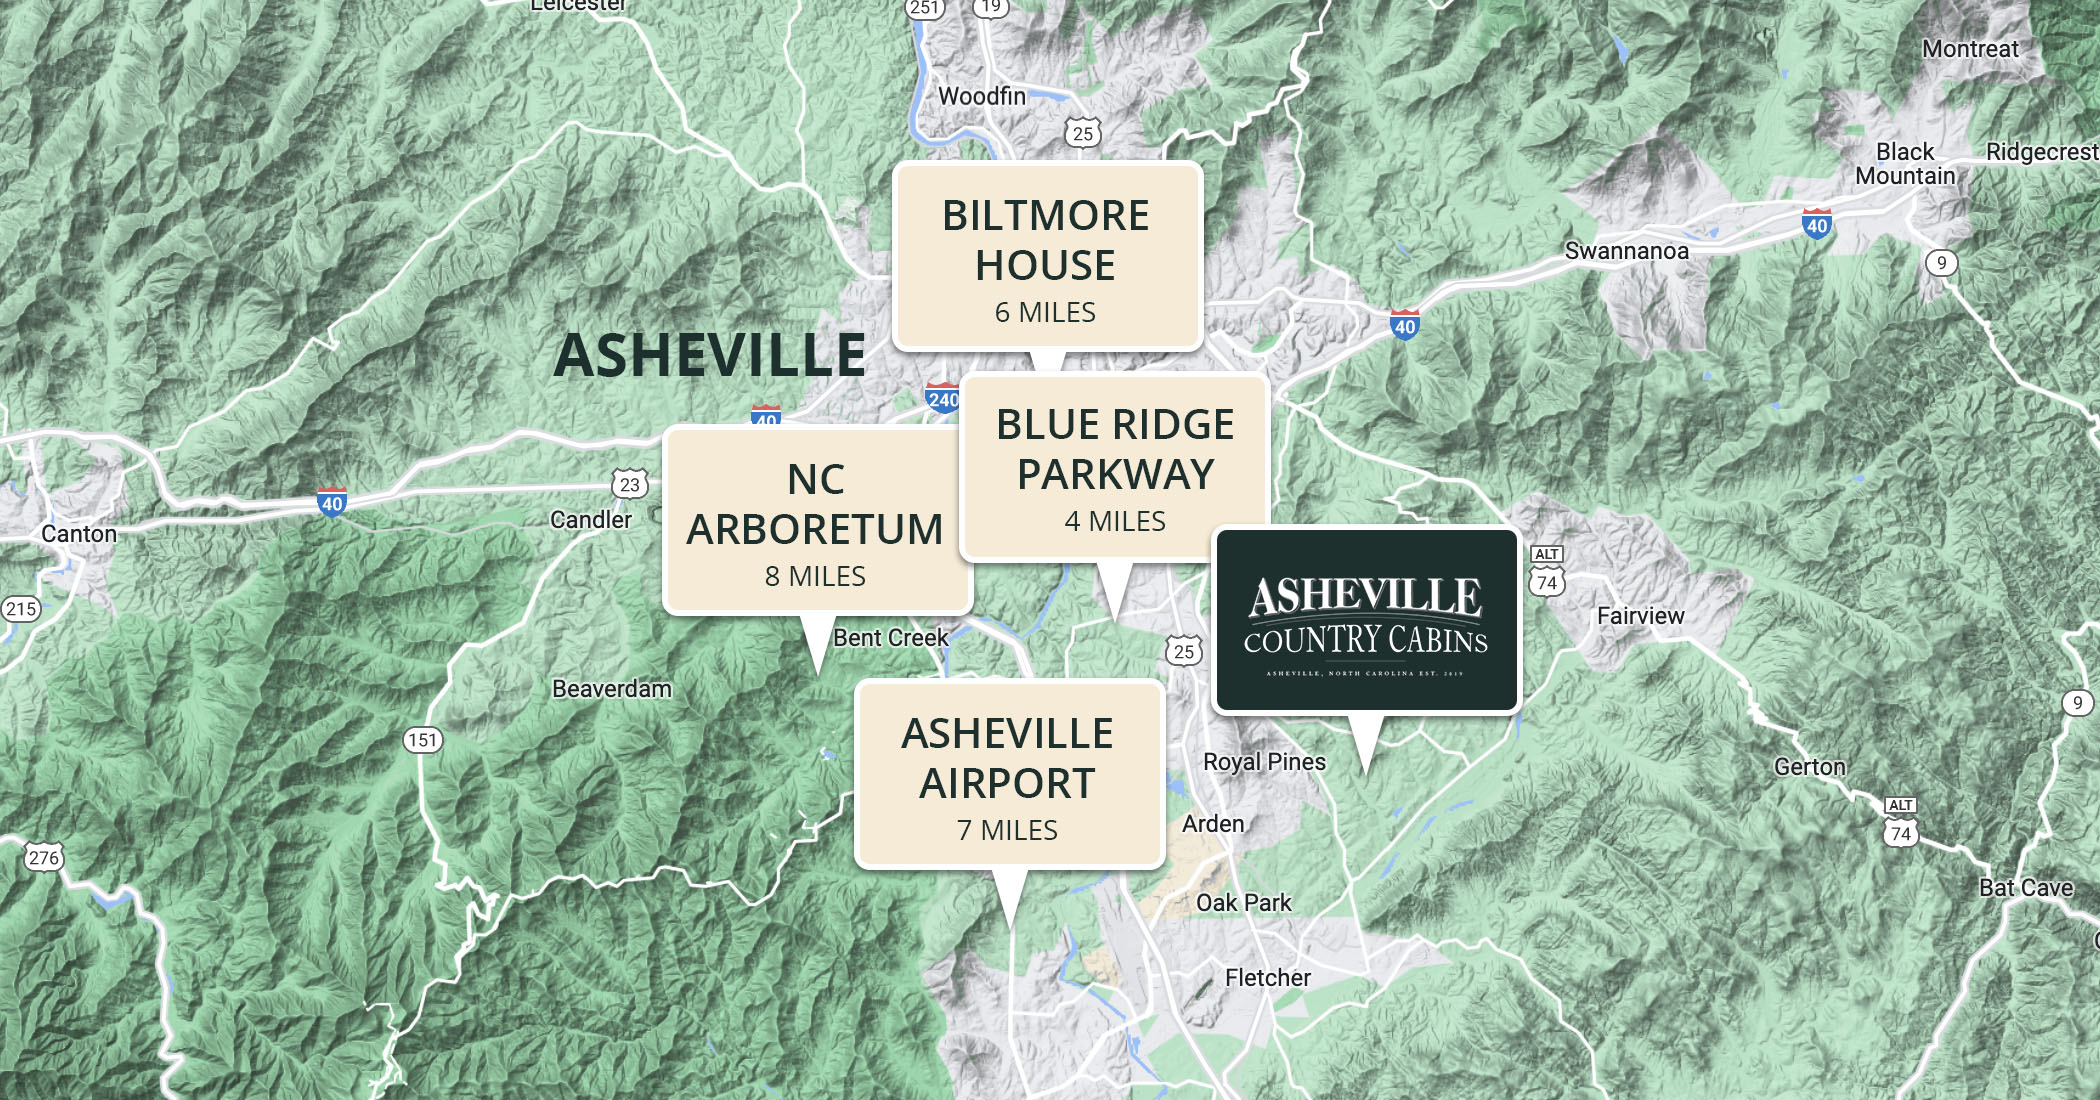 Asheville Country Cabins | Luxury Vacation Rentals